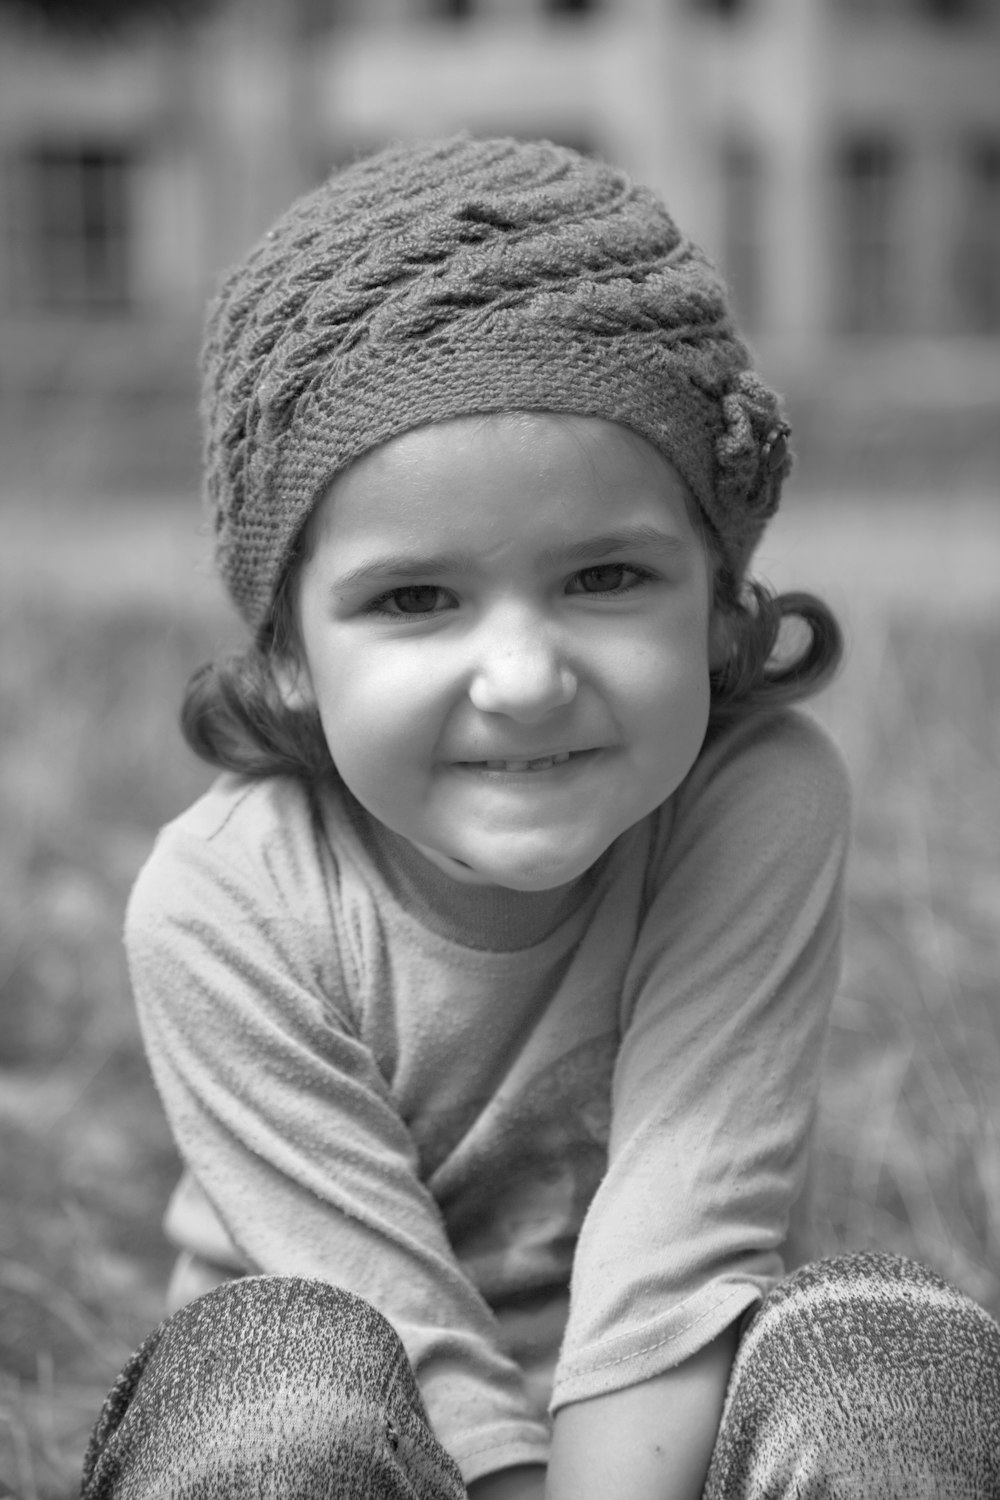 grayscale photo of smiling girl wearing knit cap and crew neck long sleeve shirt